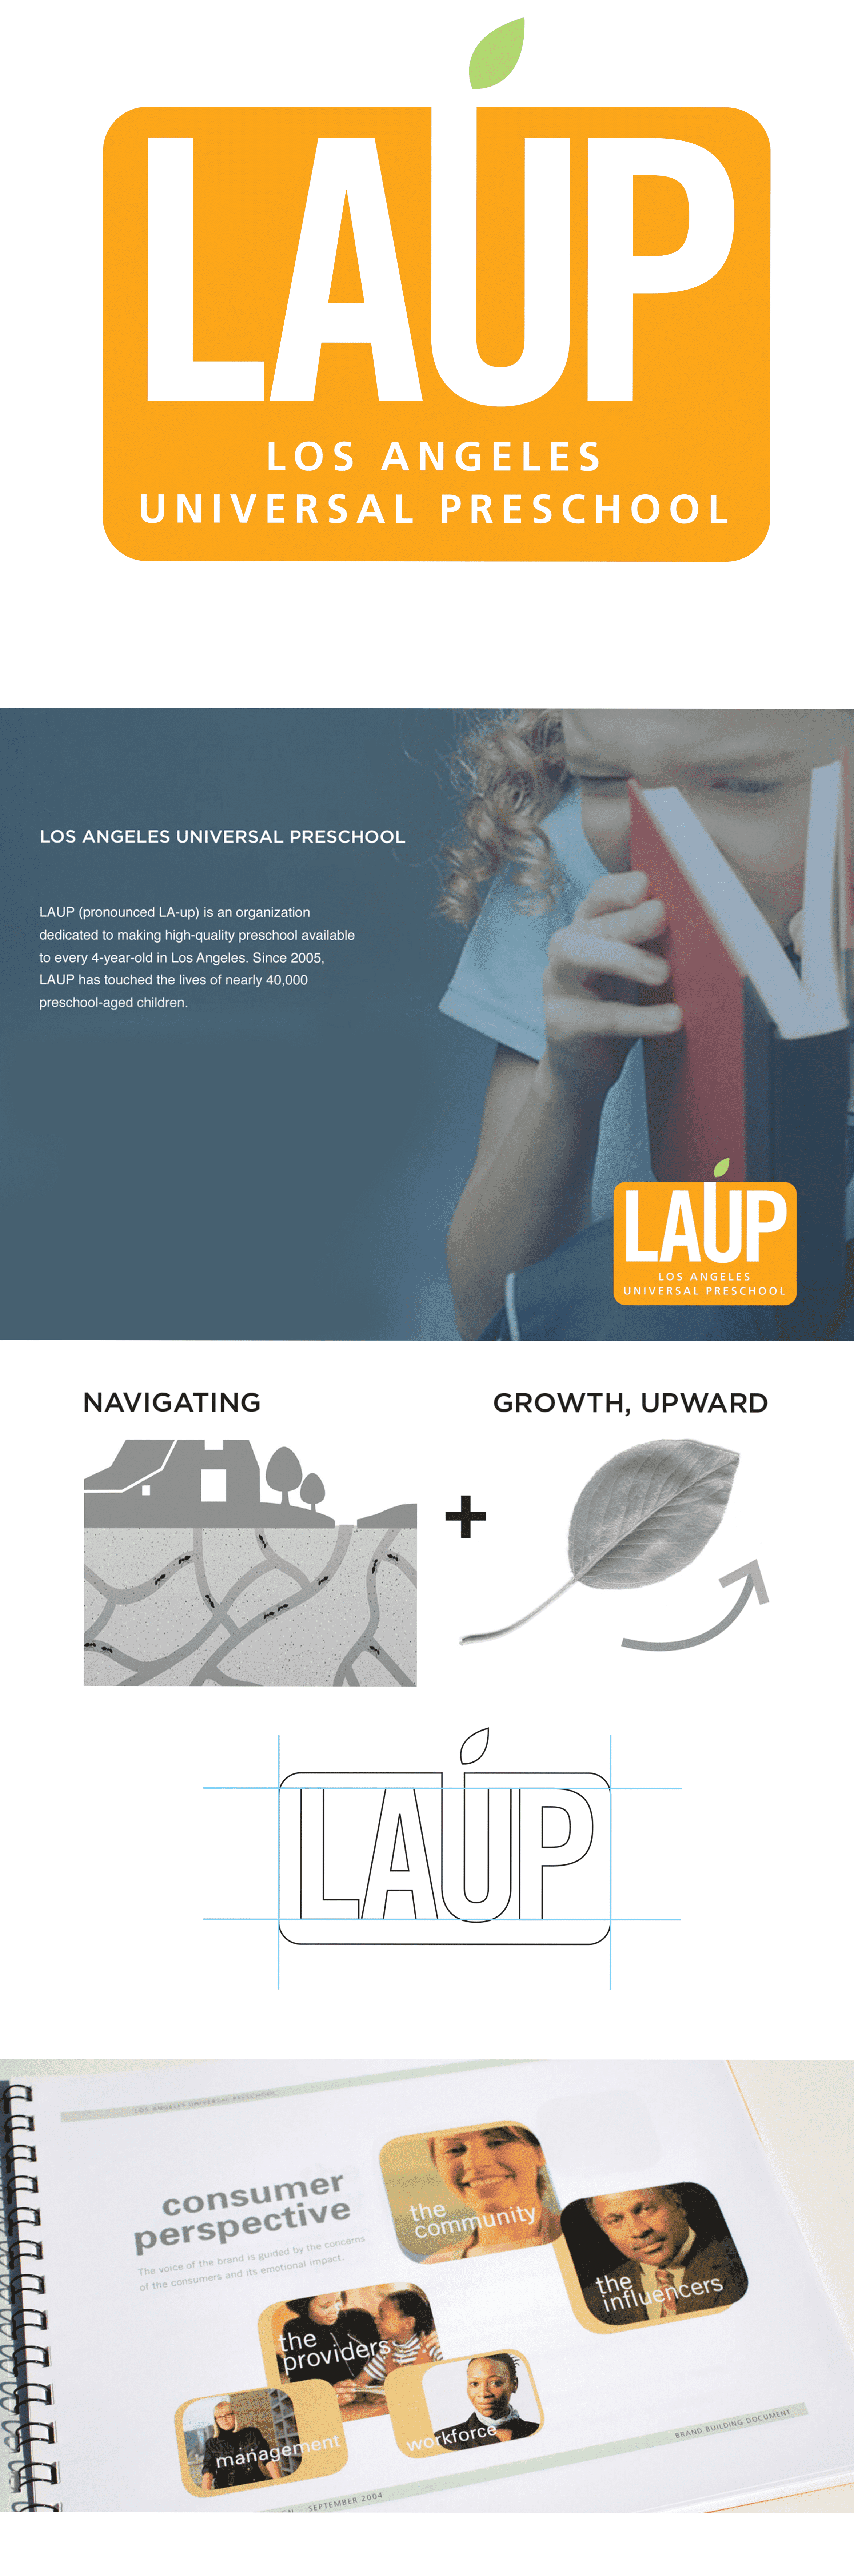 laup-specialmoderndesign-part1.png